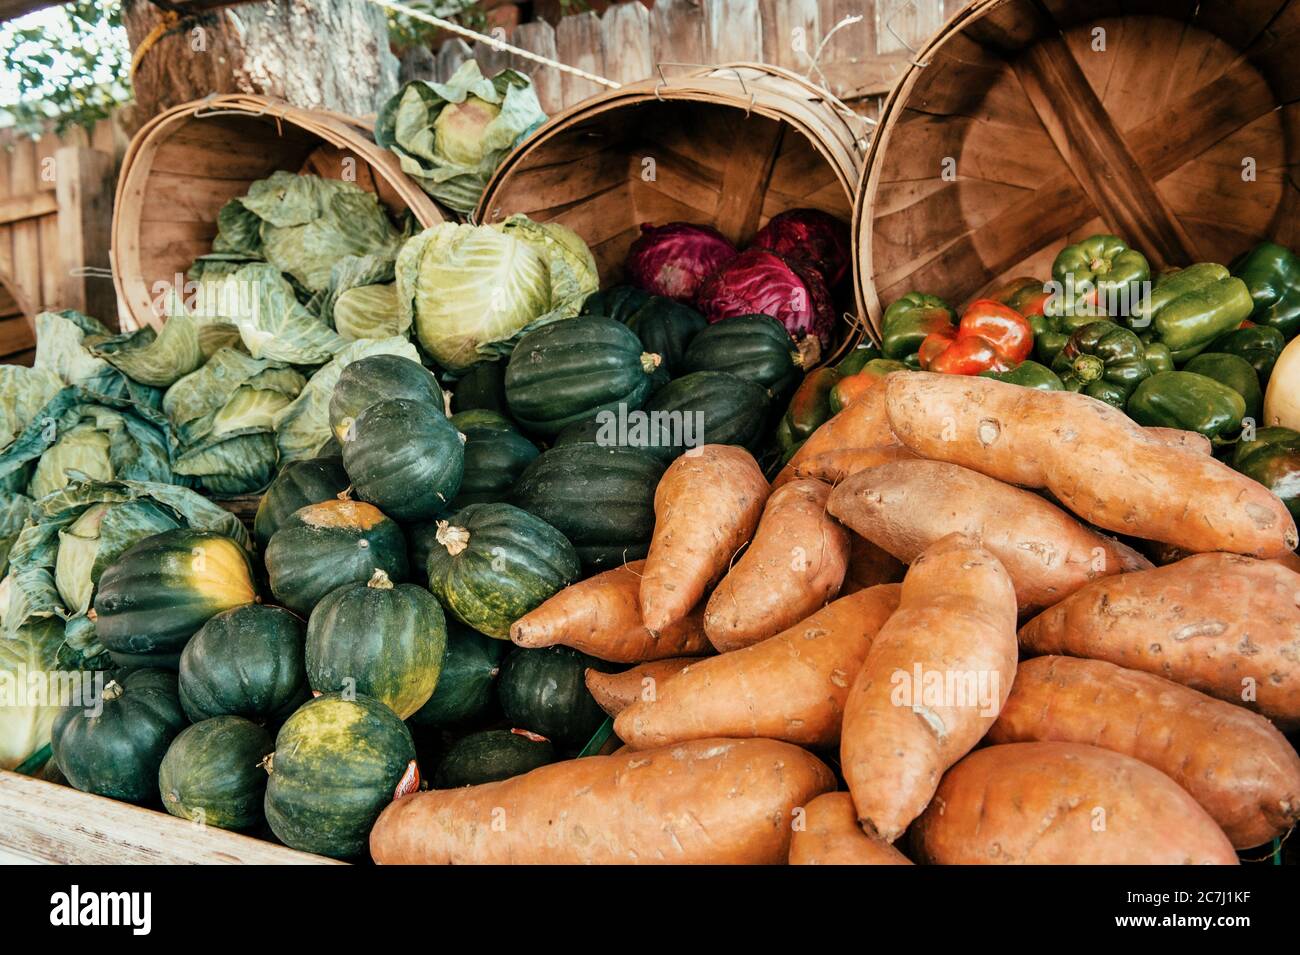 Fresh fruit and vegetable stand or roadside produce market. Stock Photo